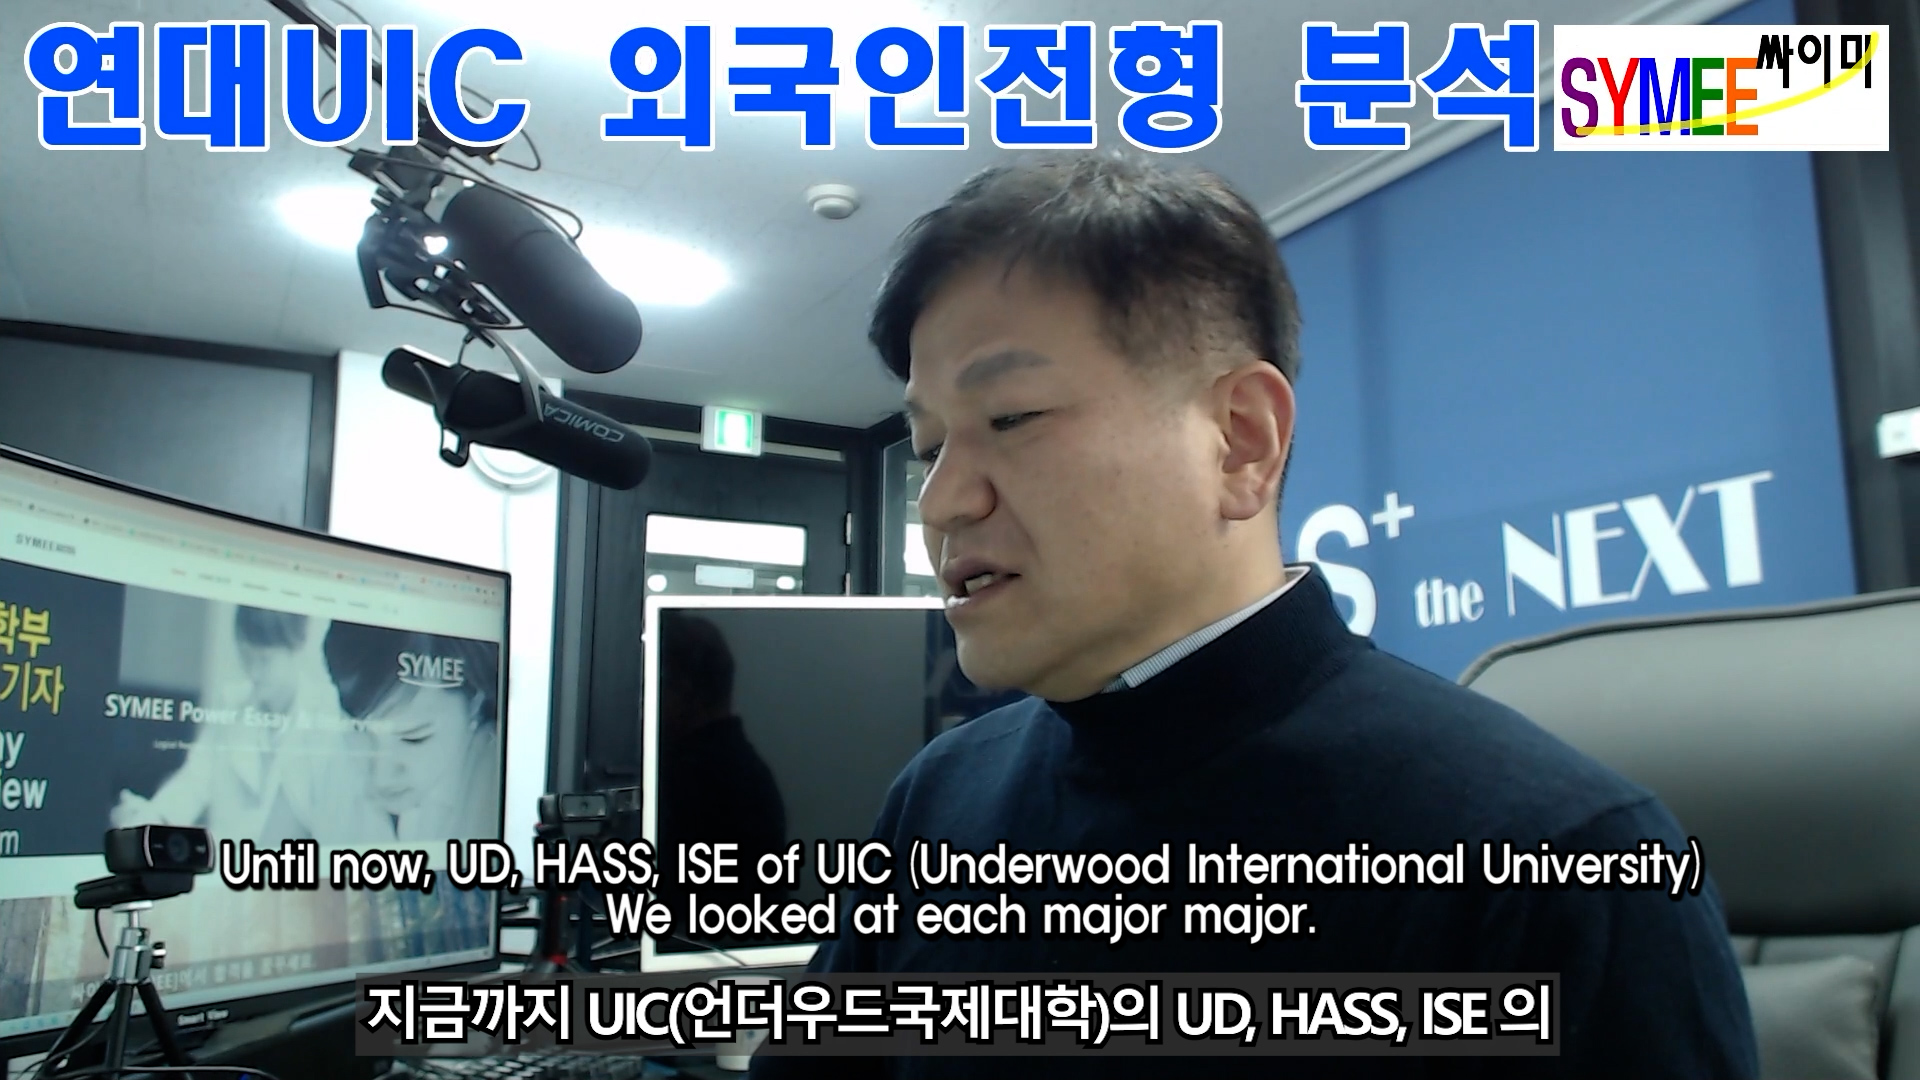 Yonsei Univ. Admission for UIC for Foreign Student 05 Majors.00_07_51_25.스틸 012.jpg